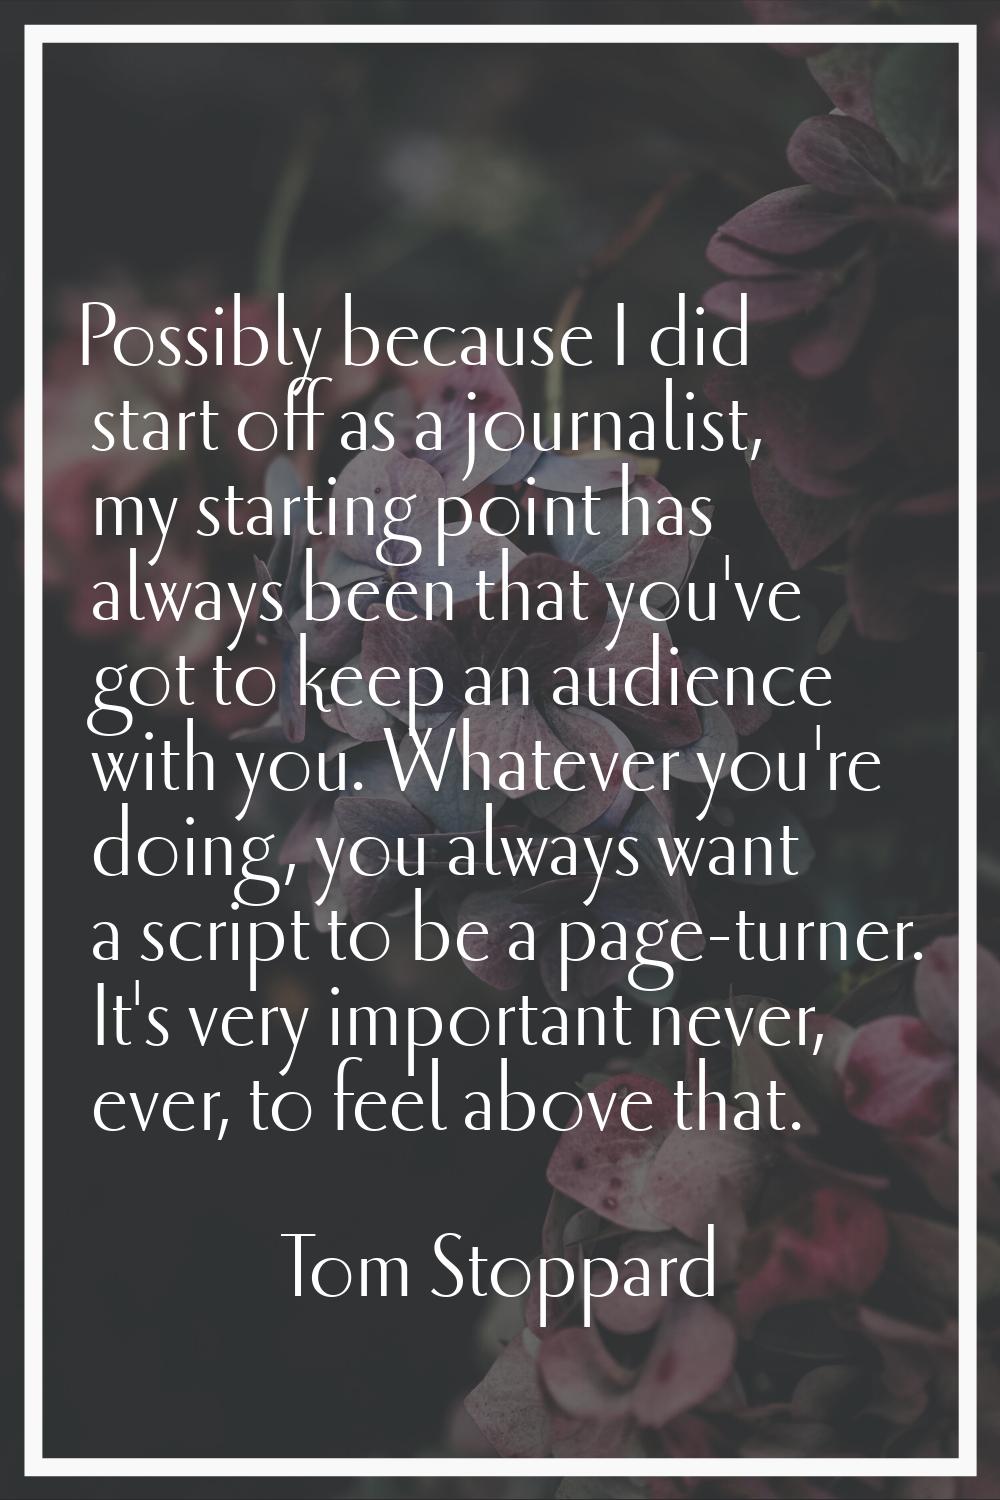 Possibly because I did start off as a journalist, my starting point has always been that you've got